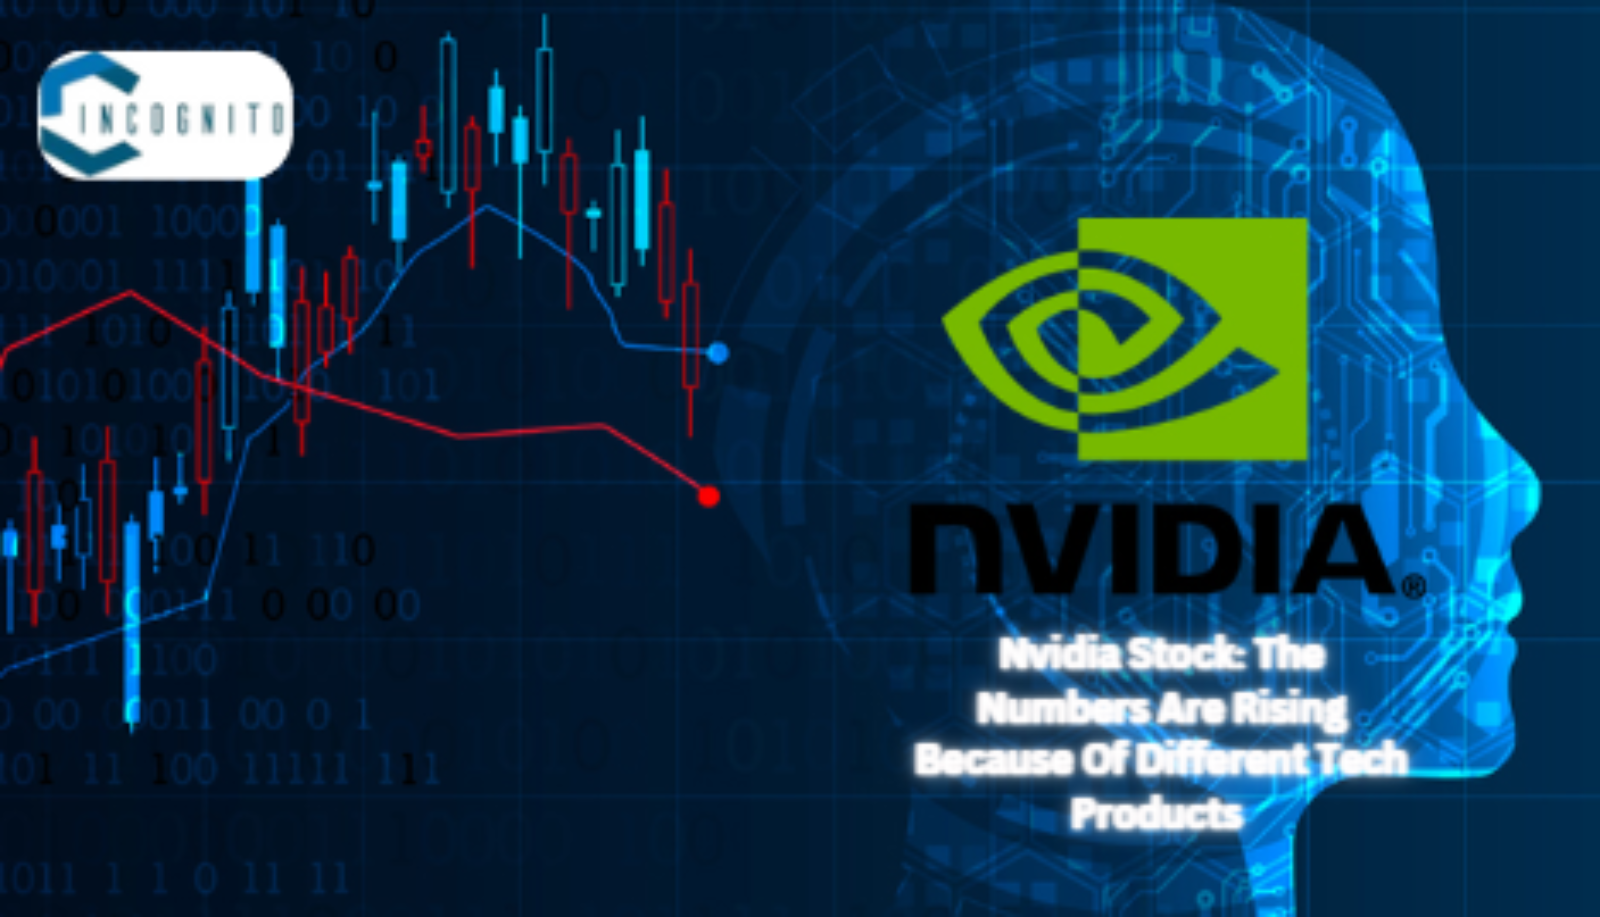 Nvidia Stock: The Numbers Are Rising Because Of Different Tech Products 